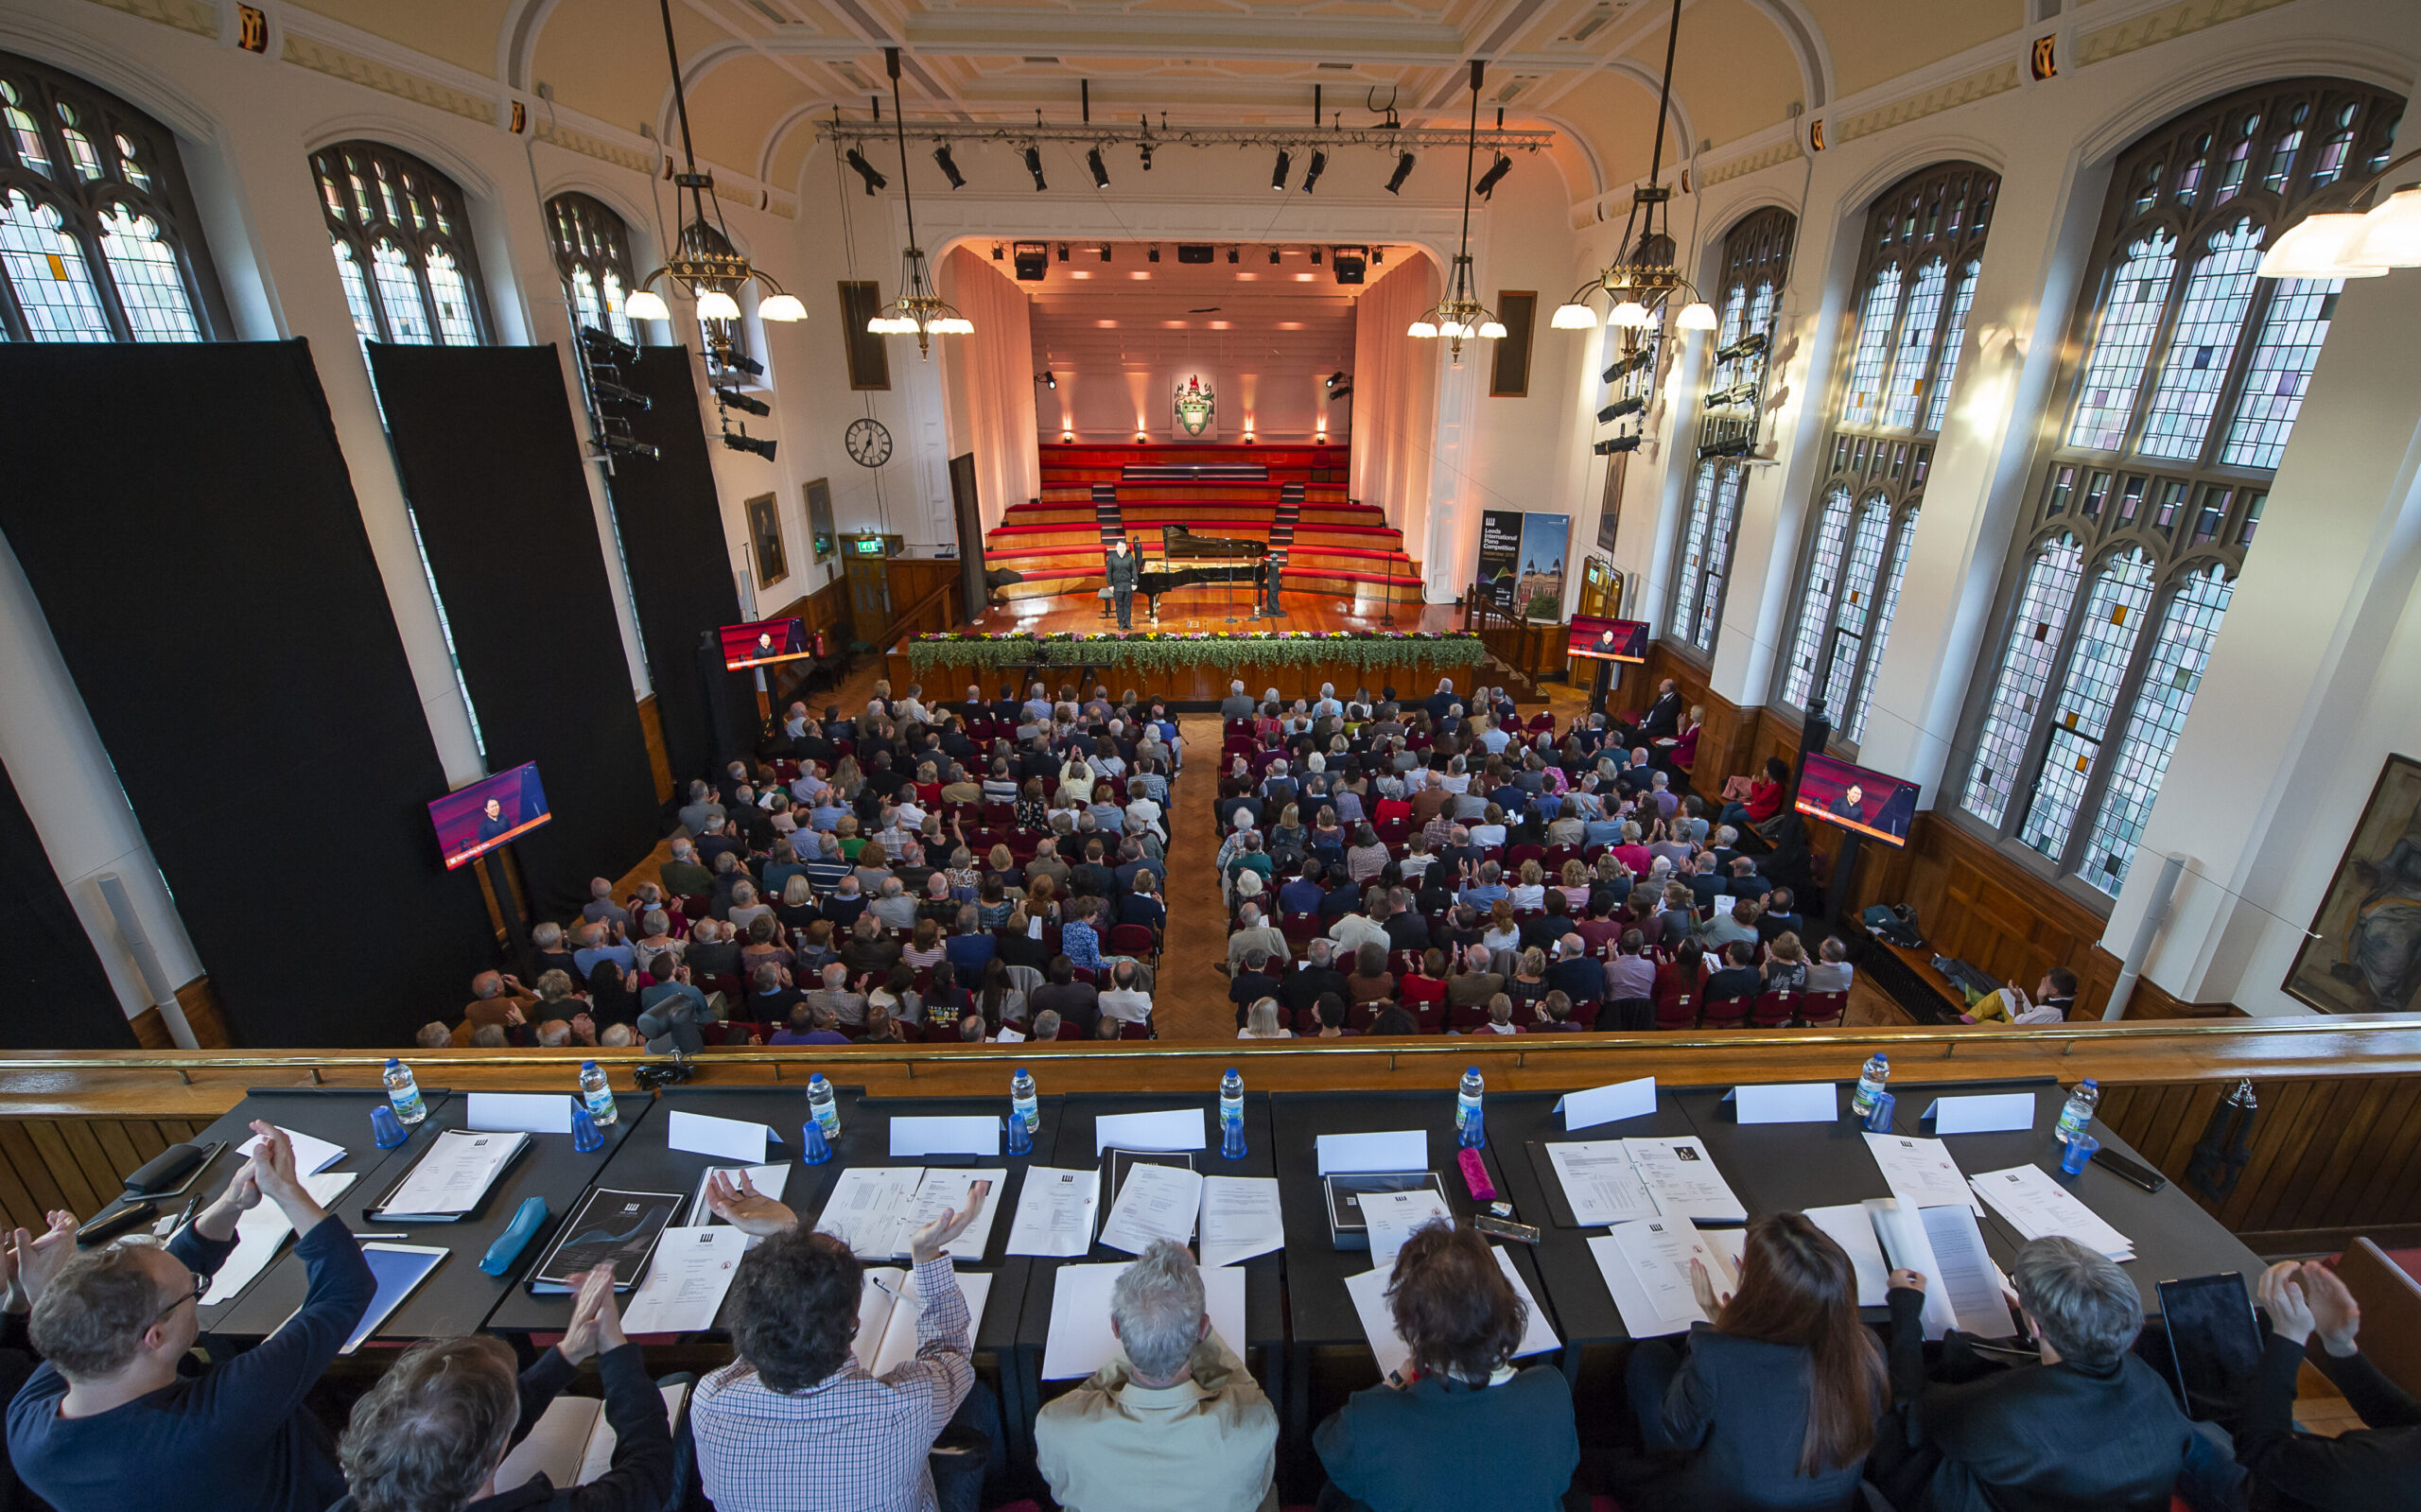 Picture looking down into the great hall, showing judges, audience and grand piano on stage.